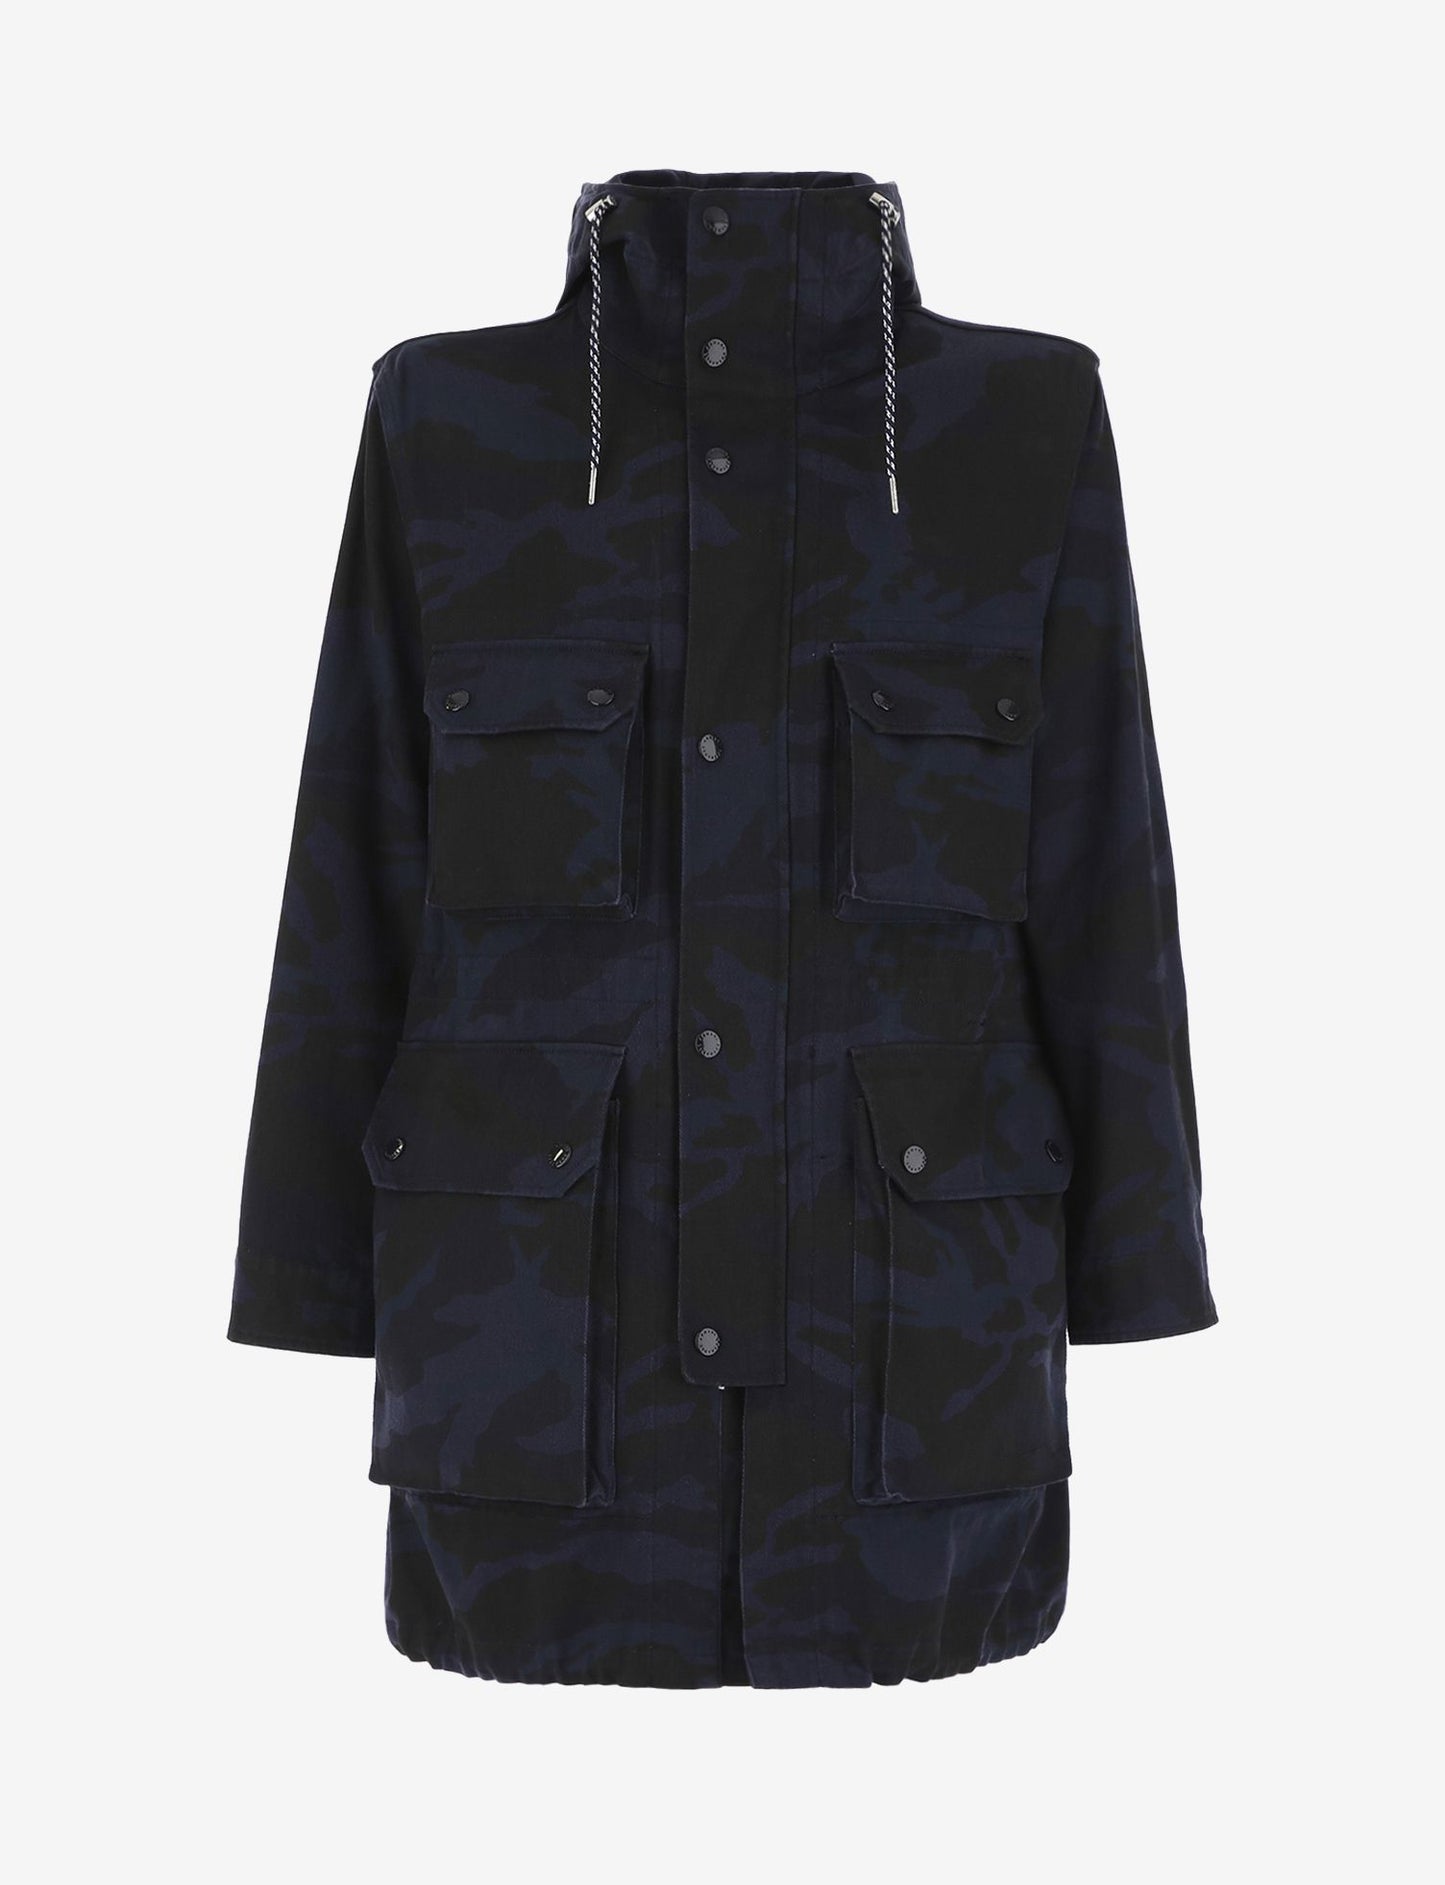 Armani Exchange Camouflage Hooded Trench Coat in Dark Blue